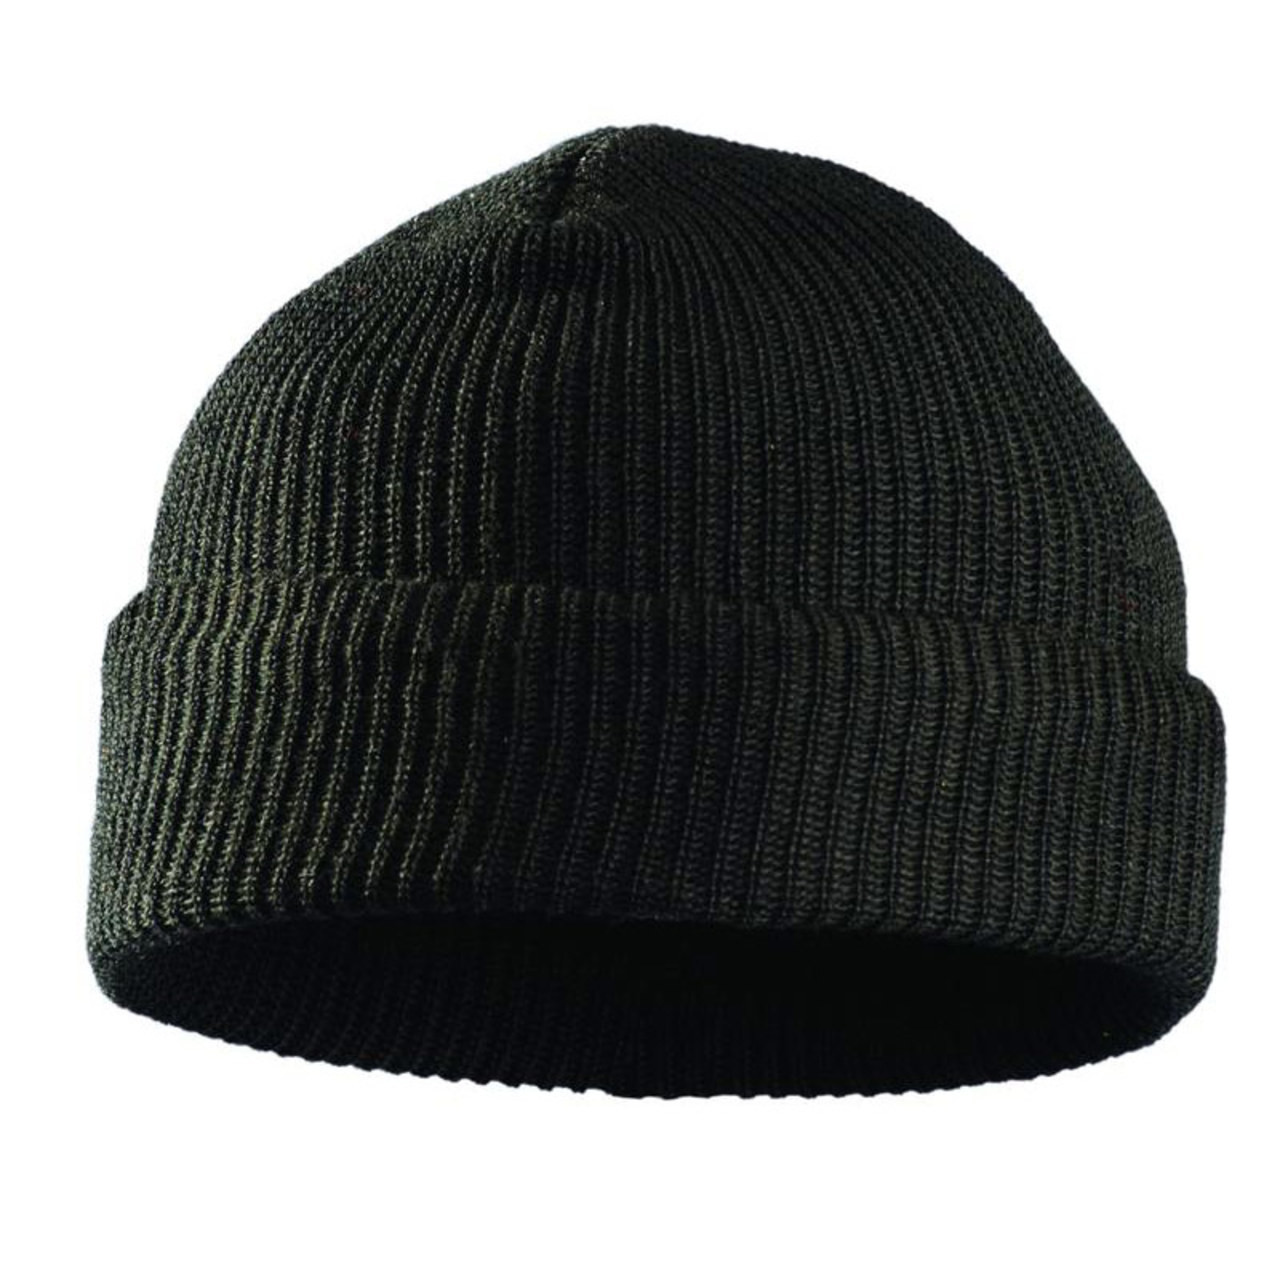 Image of OccuNomix Flame Resistant Cap - 1079